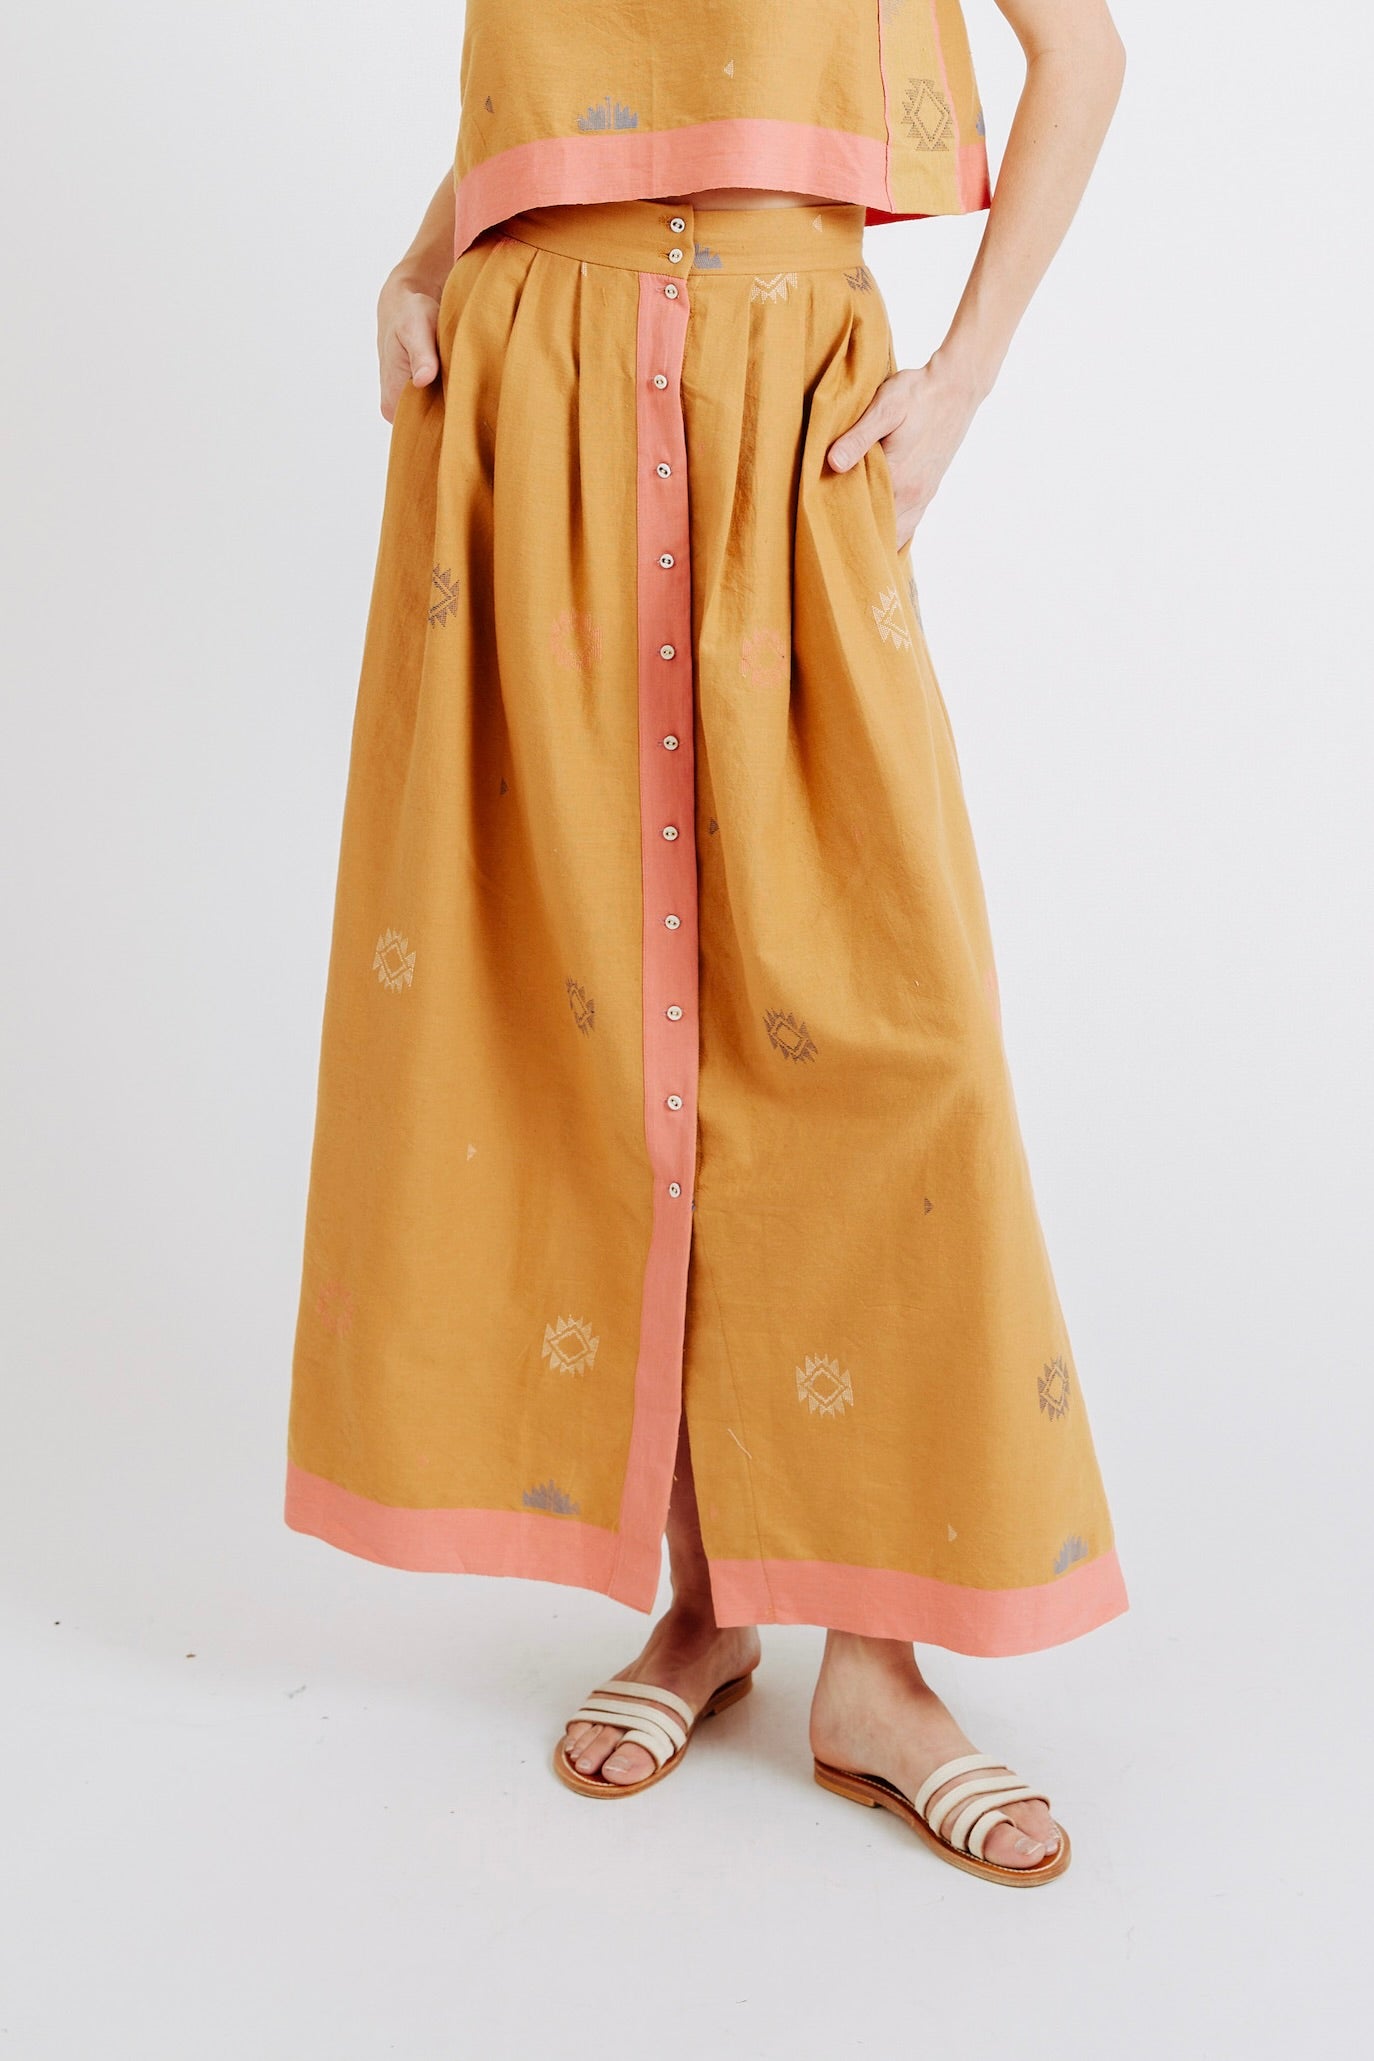 A statement maxi skirt for transitioning to warmer temps featuring jamdani, a weaving technique native to West Bengal. Ethically made with 100% cotton in India.